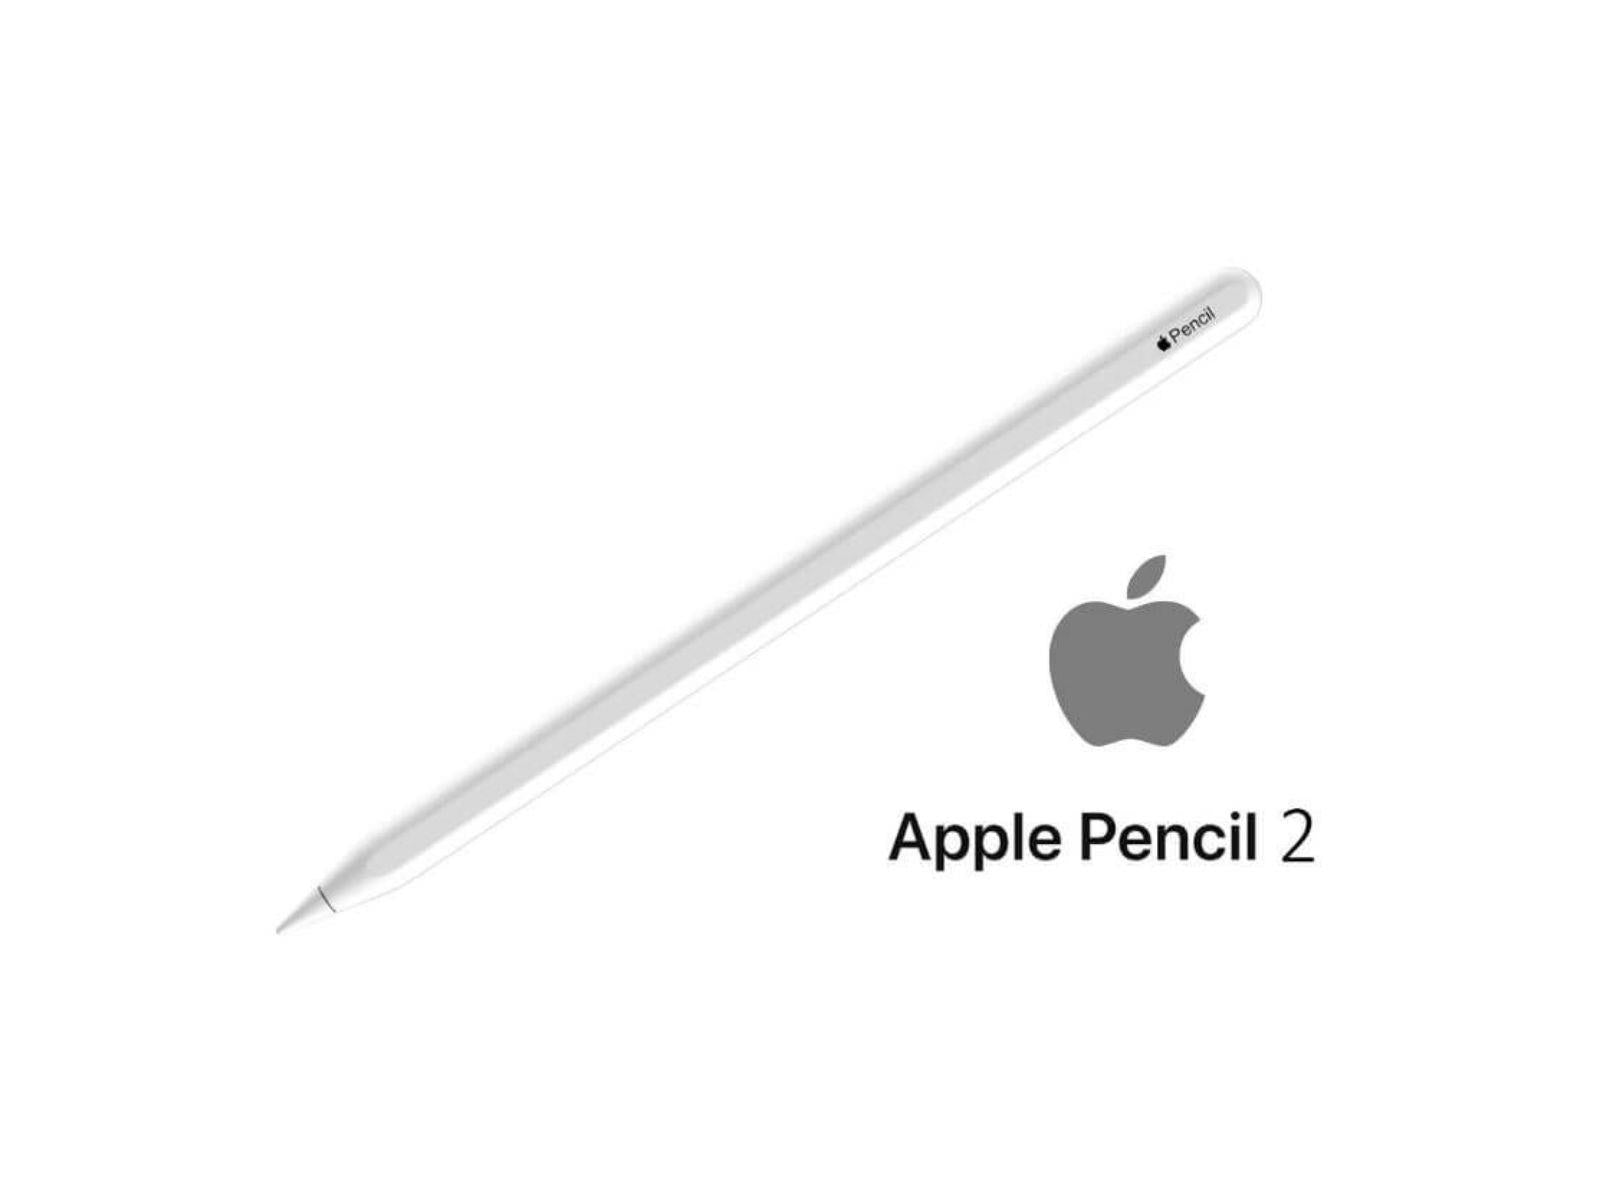 Image shows a diagonal view of the Apple Pencil 2nd Generation 